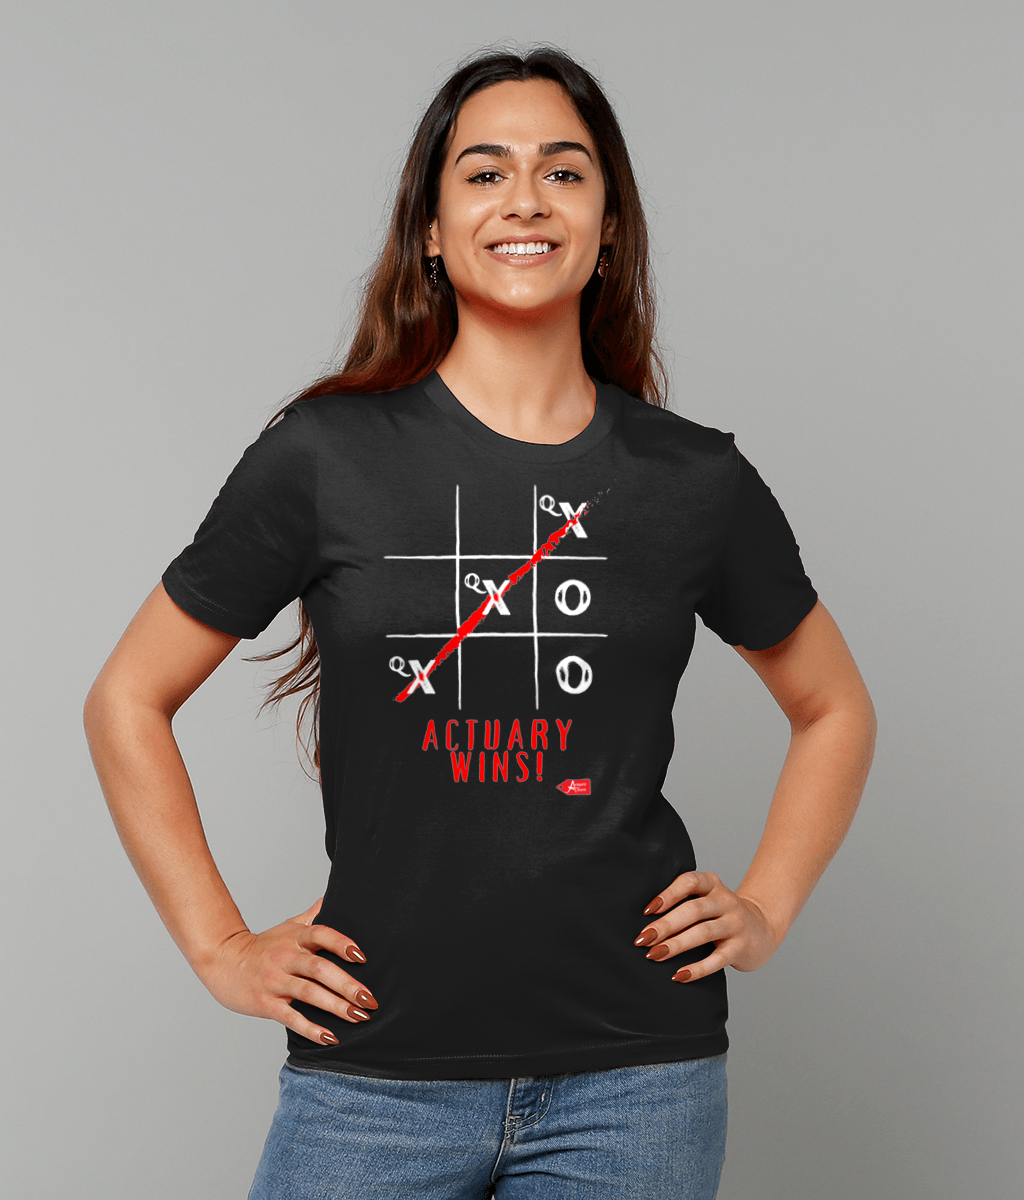 Actuary Wins Nought and Crosses Qx T-Shirt